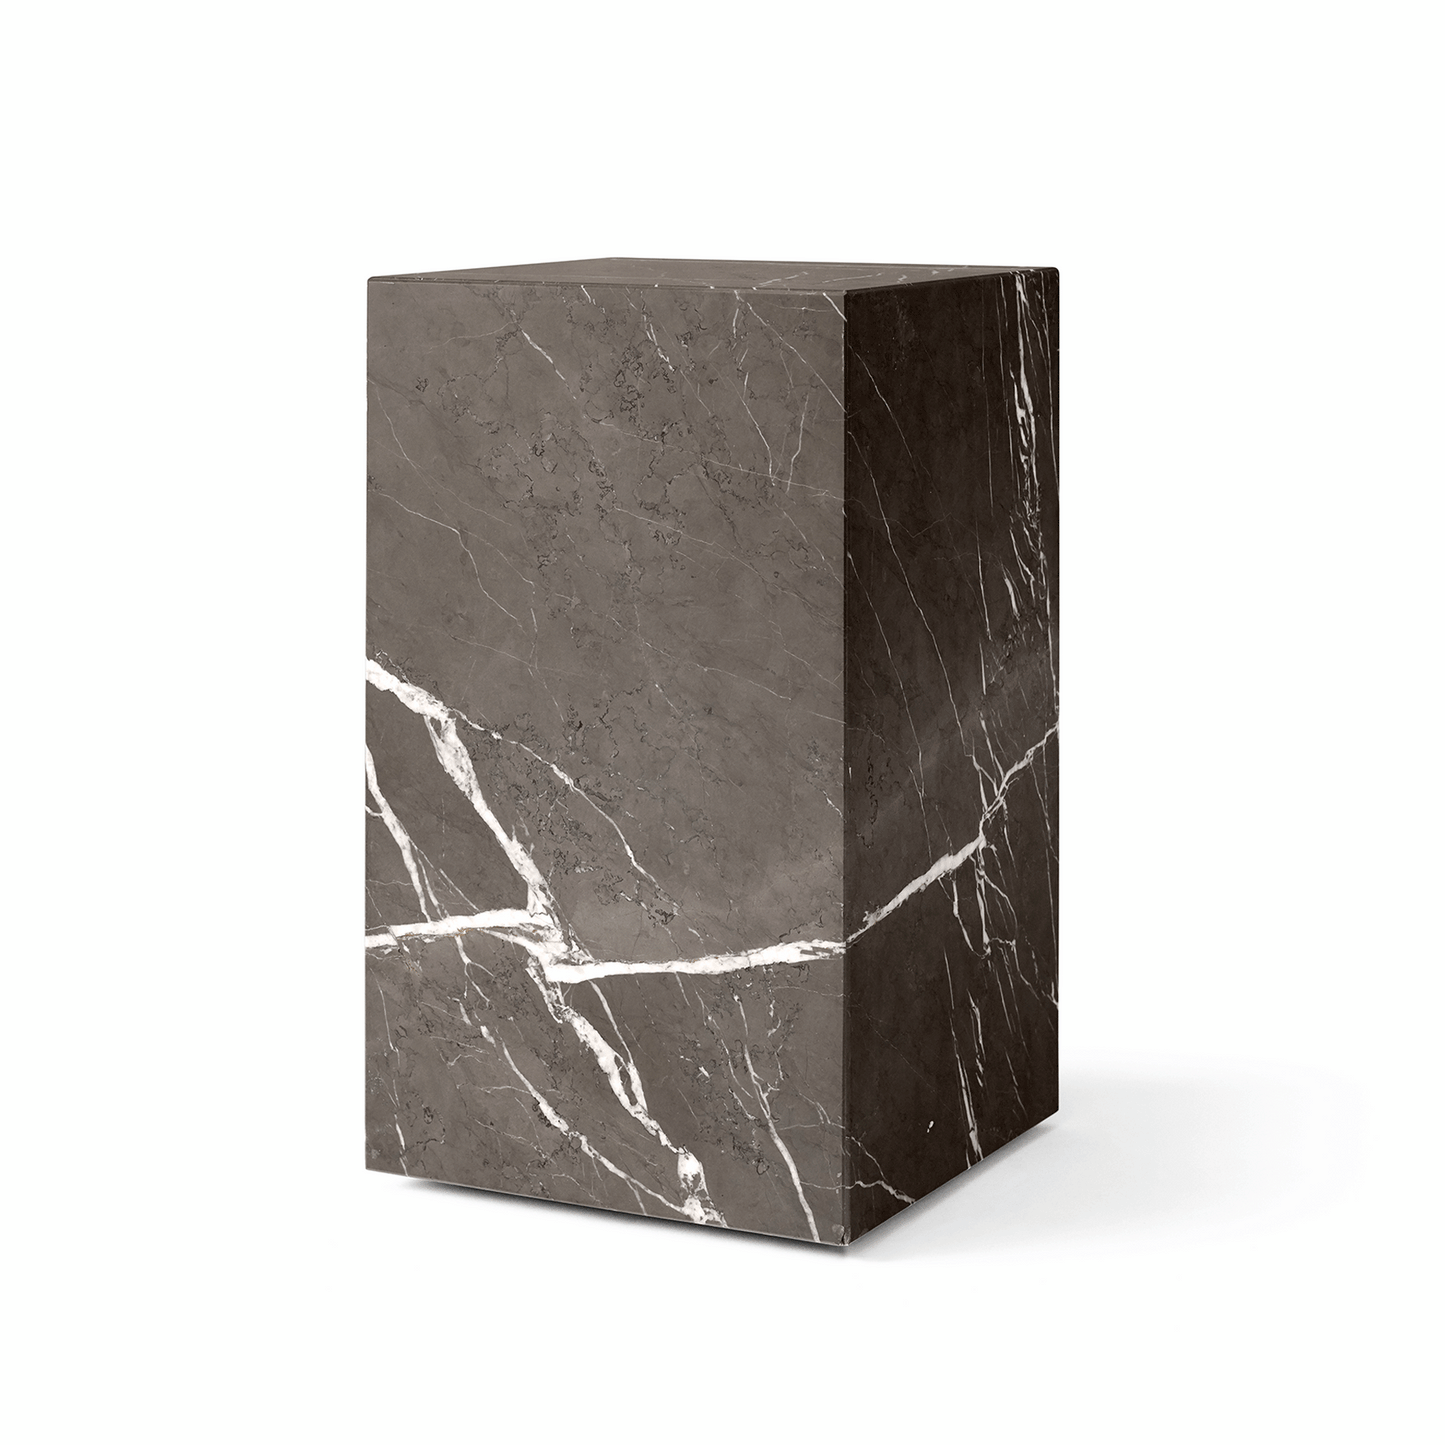 Plinth Coffee Table High by Audo #Gray Kendzo Marble